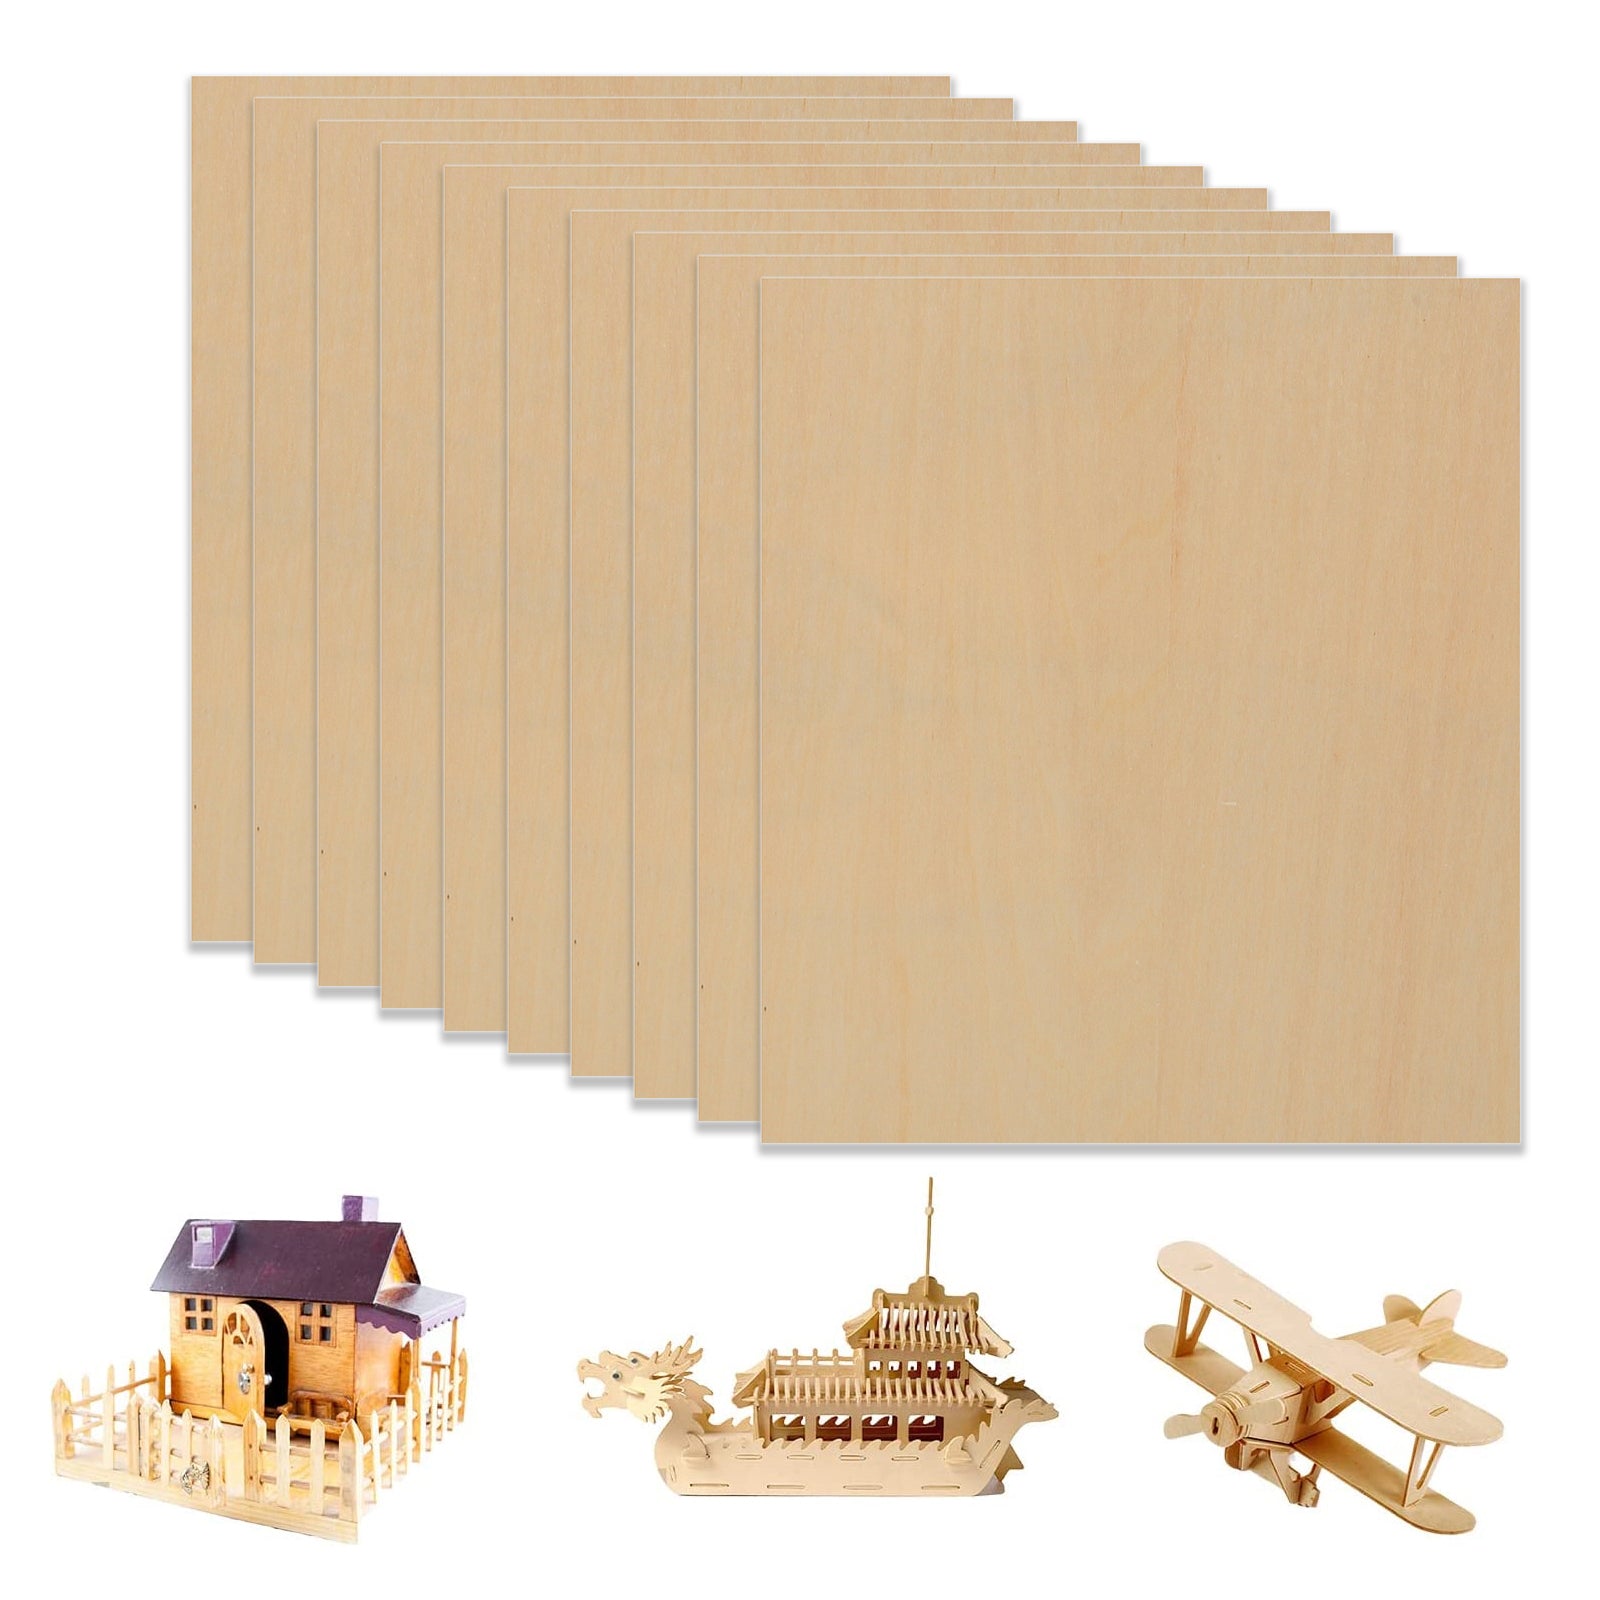 10pcs A3 Plywood Sheets 3mm Thickness (+/- 0.2mm) Basswood Plywood for Engraving - CREATORALLY